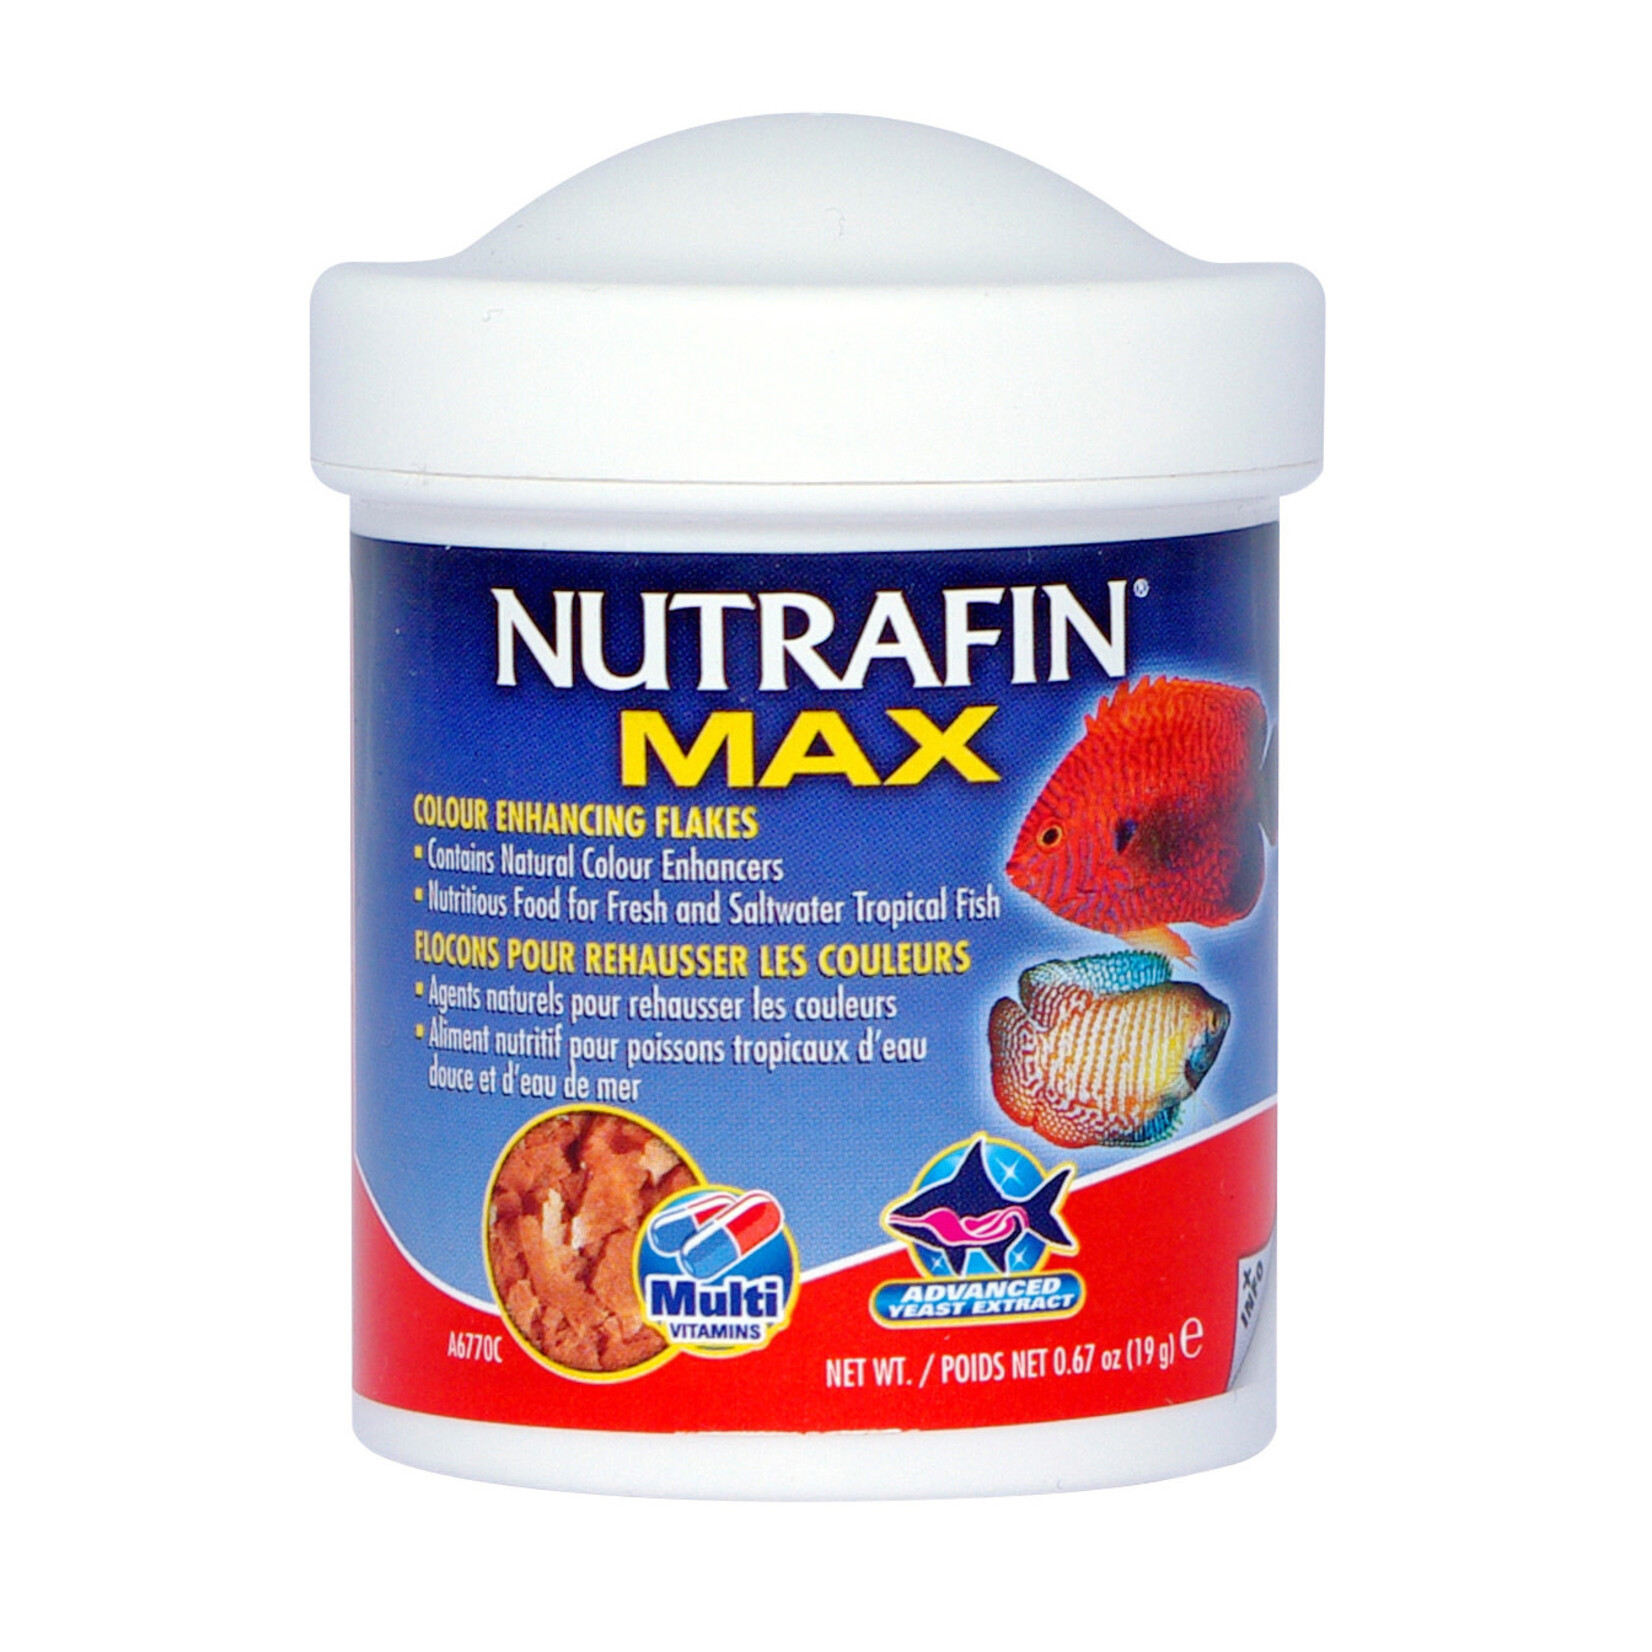 NUTRAFIN NUTRAFIN MAX FLOCONS REHAUSSER LES COULEURS 19 G